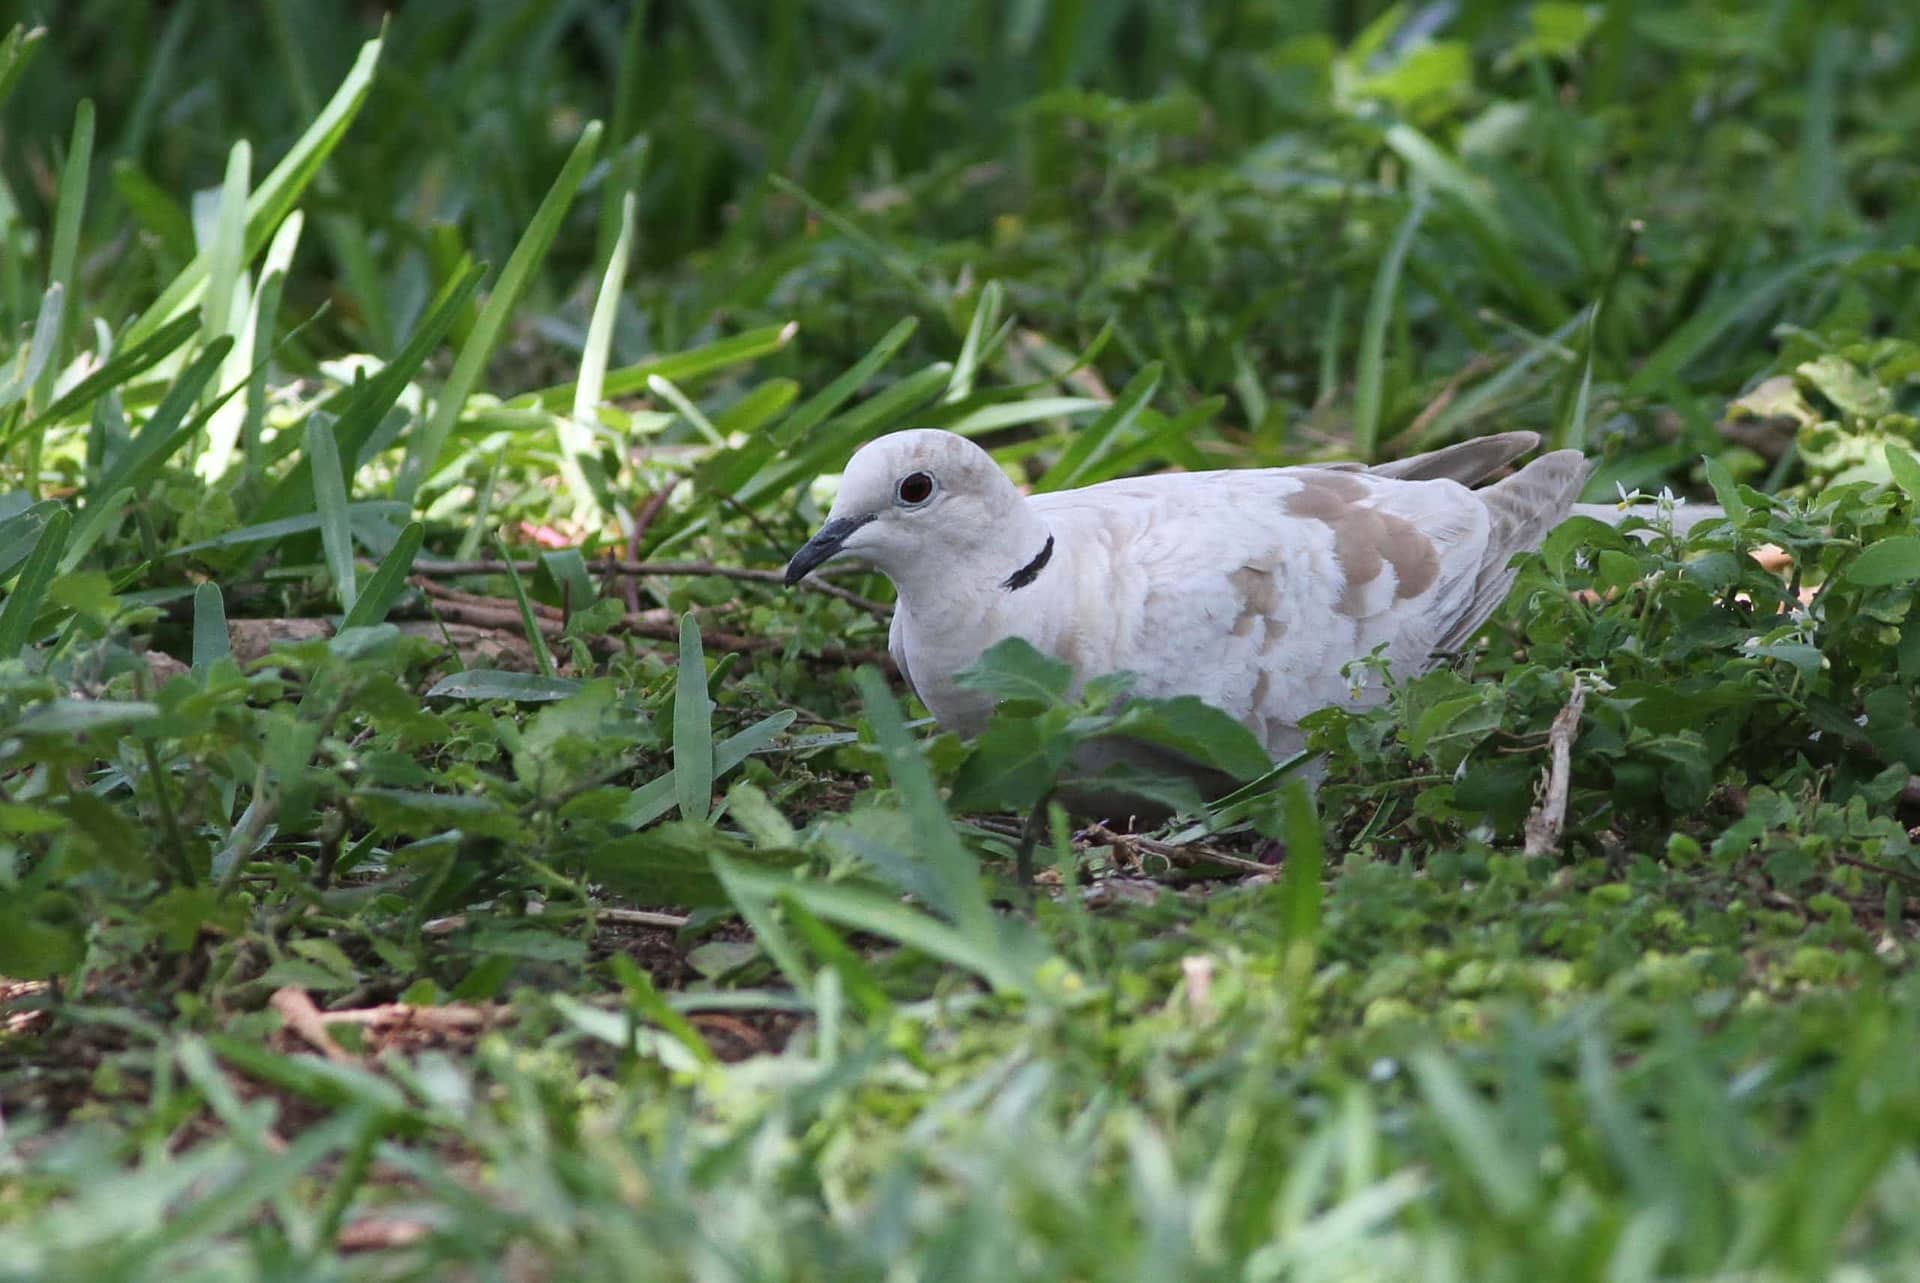 Pale Eurasian Collared-Dove, photo by Alex Lamoreaux